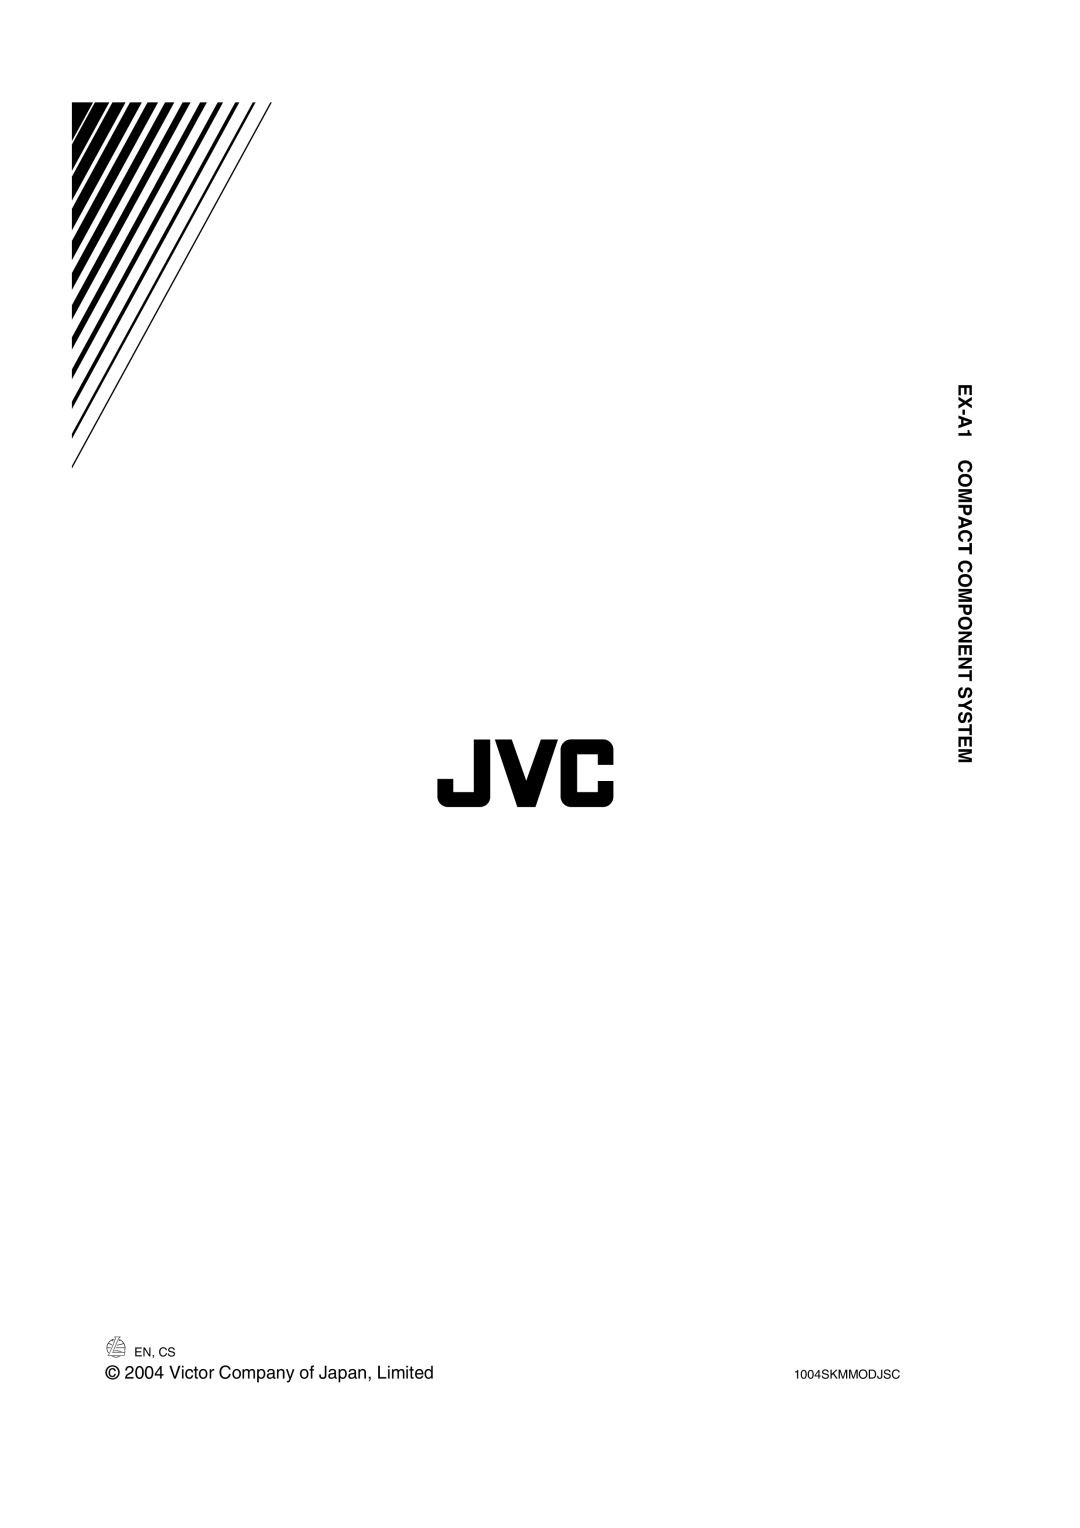 JVC manual EX-A1COMPACT COMPONENT SYSTEM, c 2004 Victor Company of Japan, Limited 